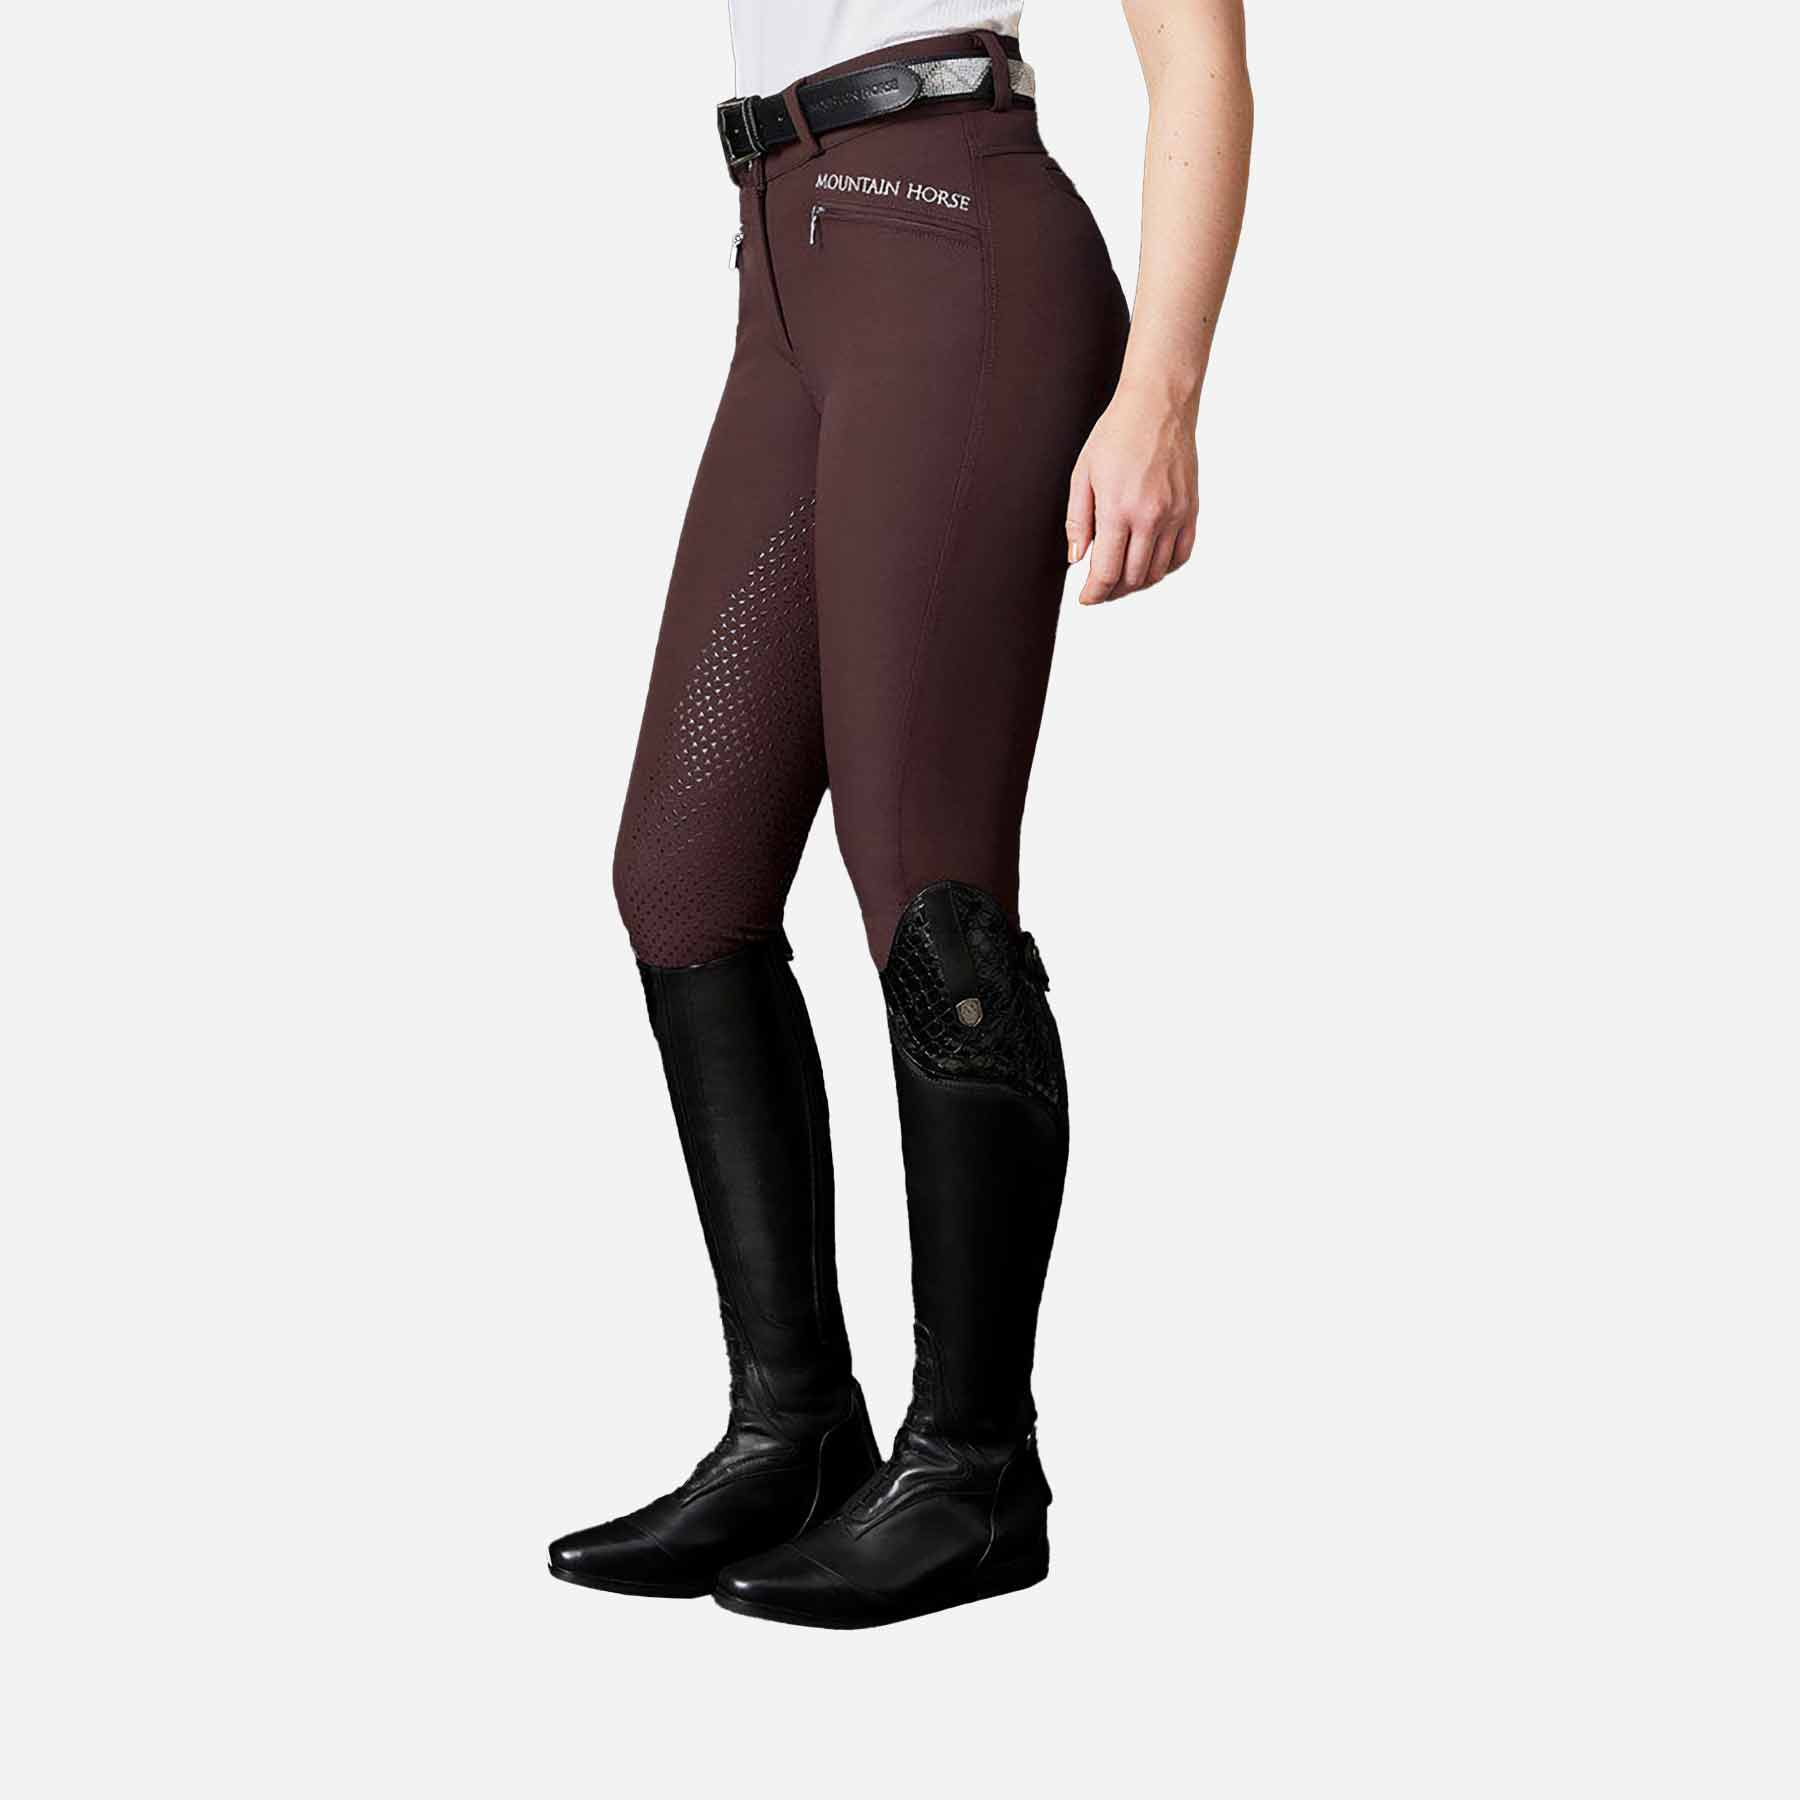 Riding Tights and Breeches: The Perfect Blend of Comfort and Style